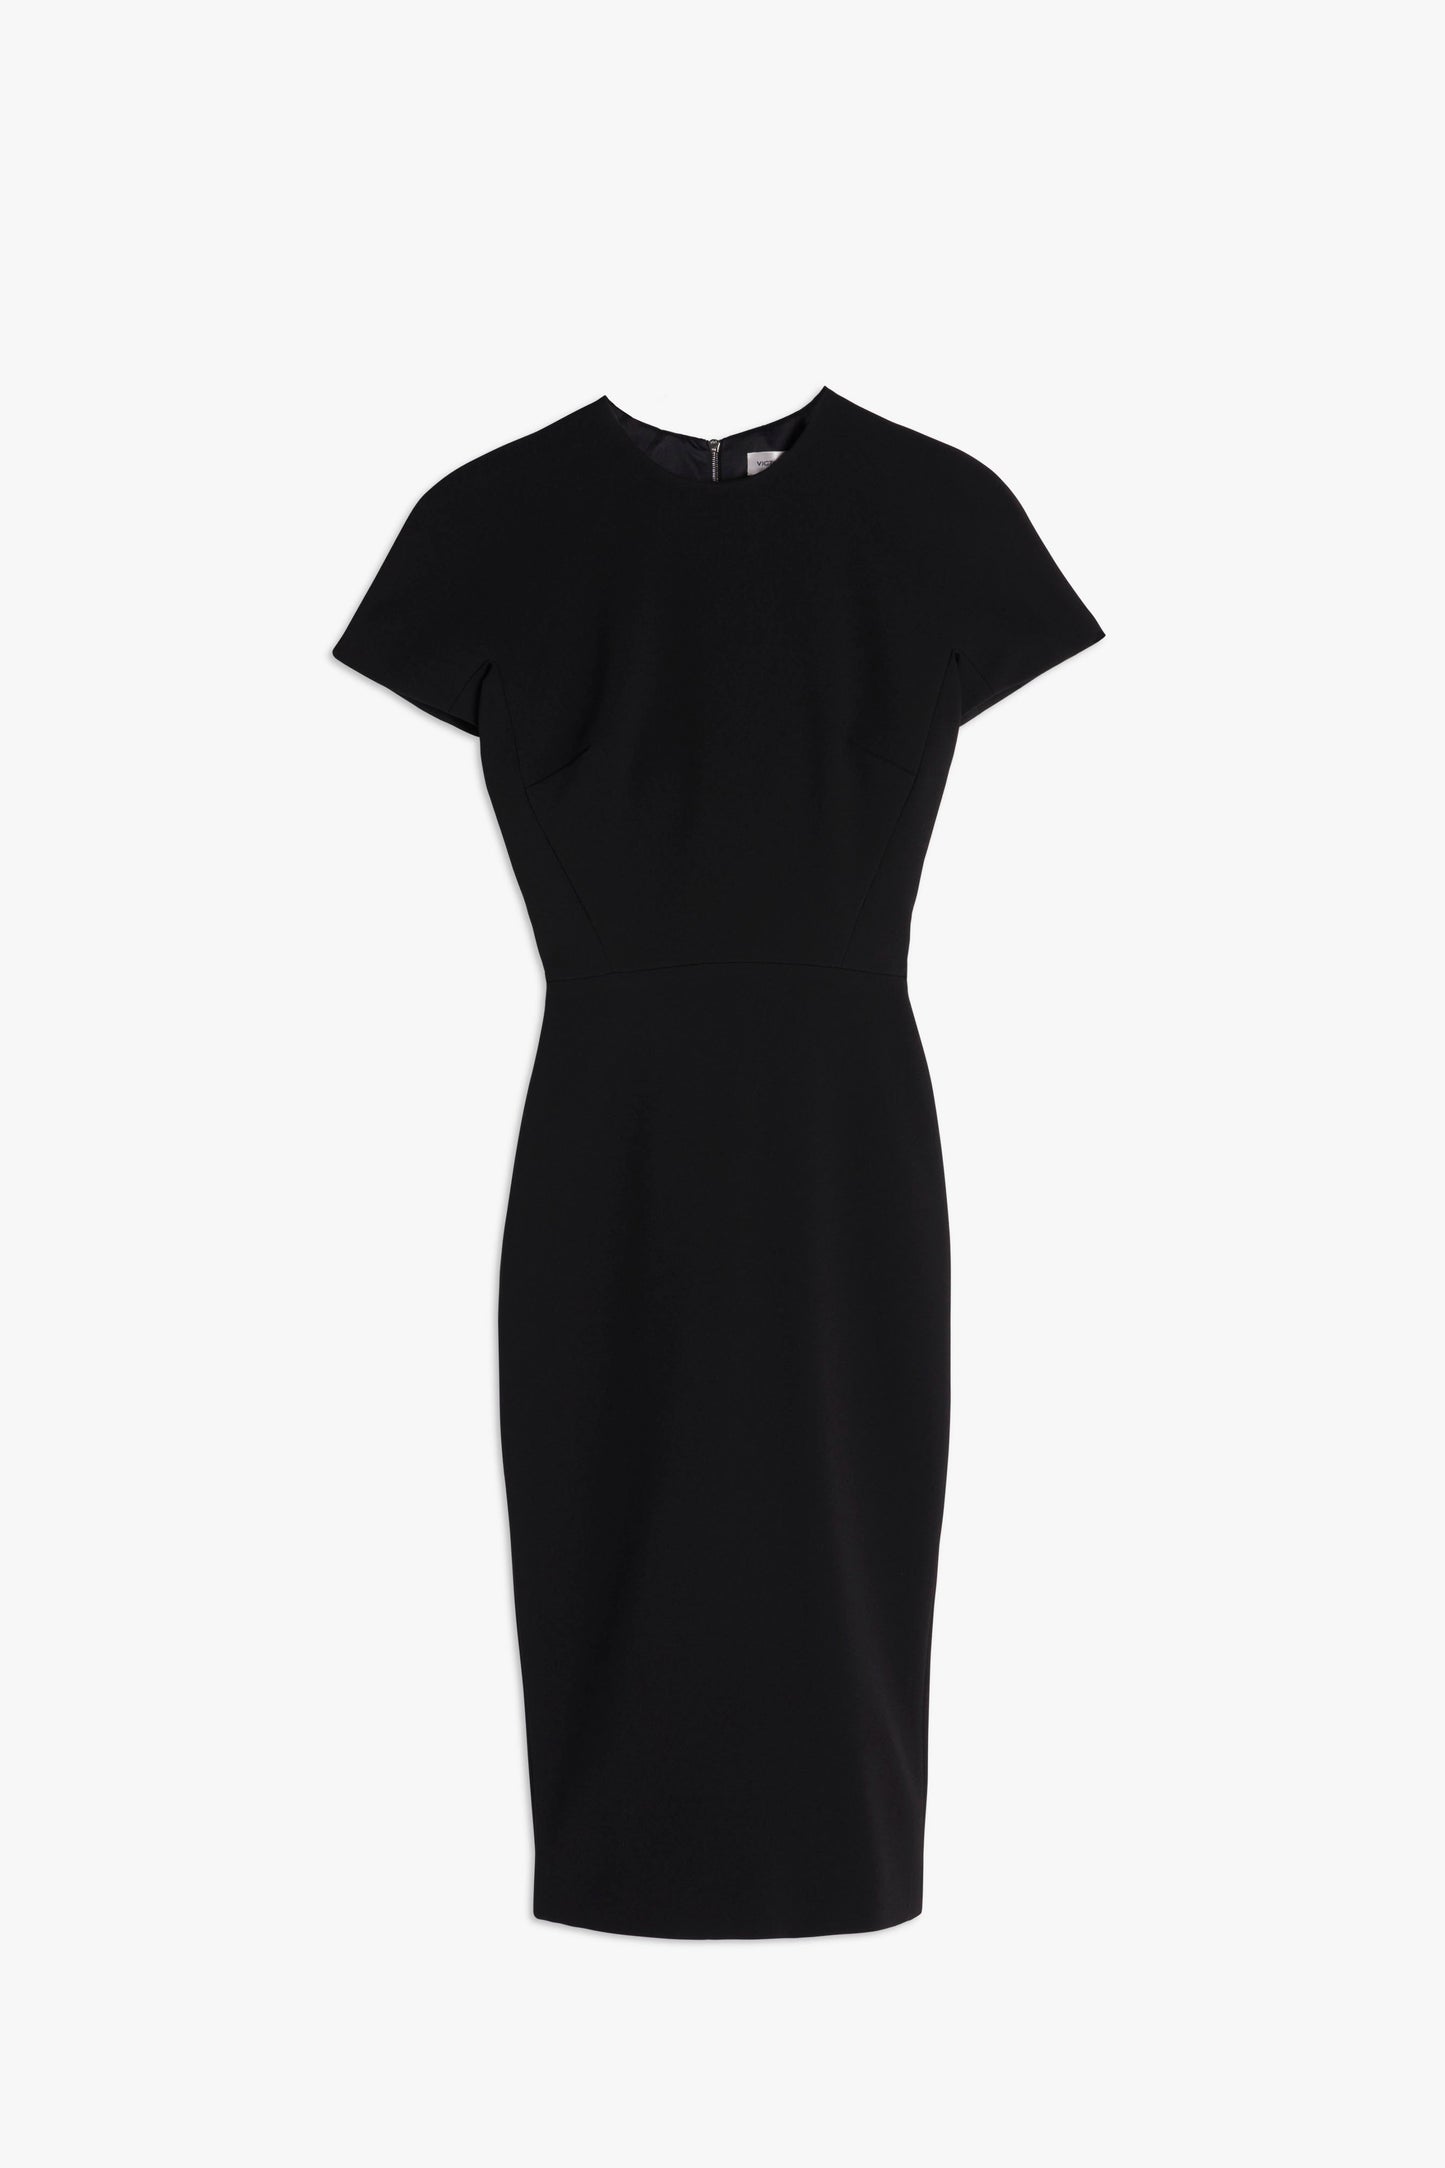 A black knee-length Victoria Beckham Fitted T-Shirt Dress with short sleeves and a simple round neckline, displayed against a white background.